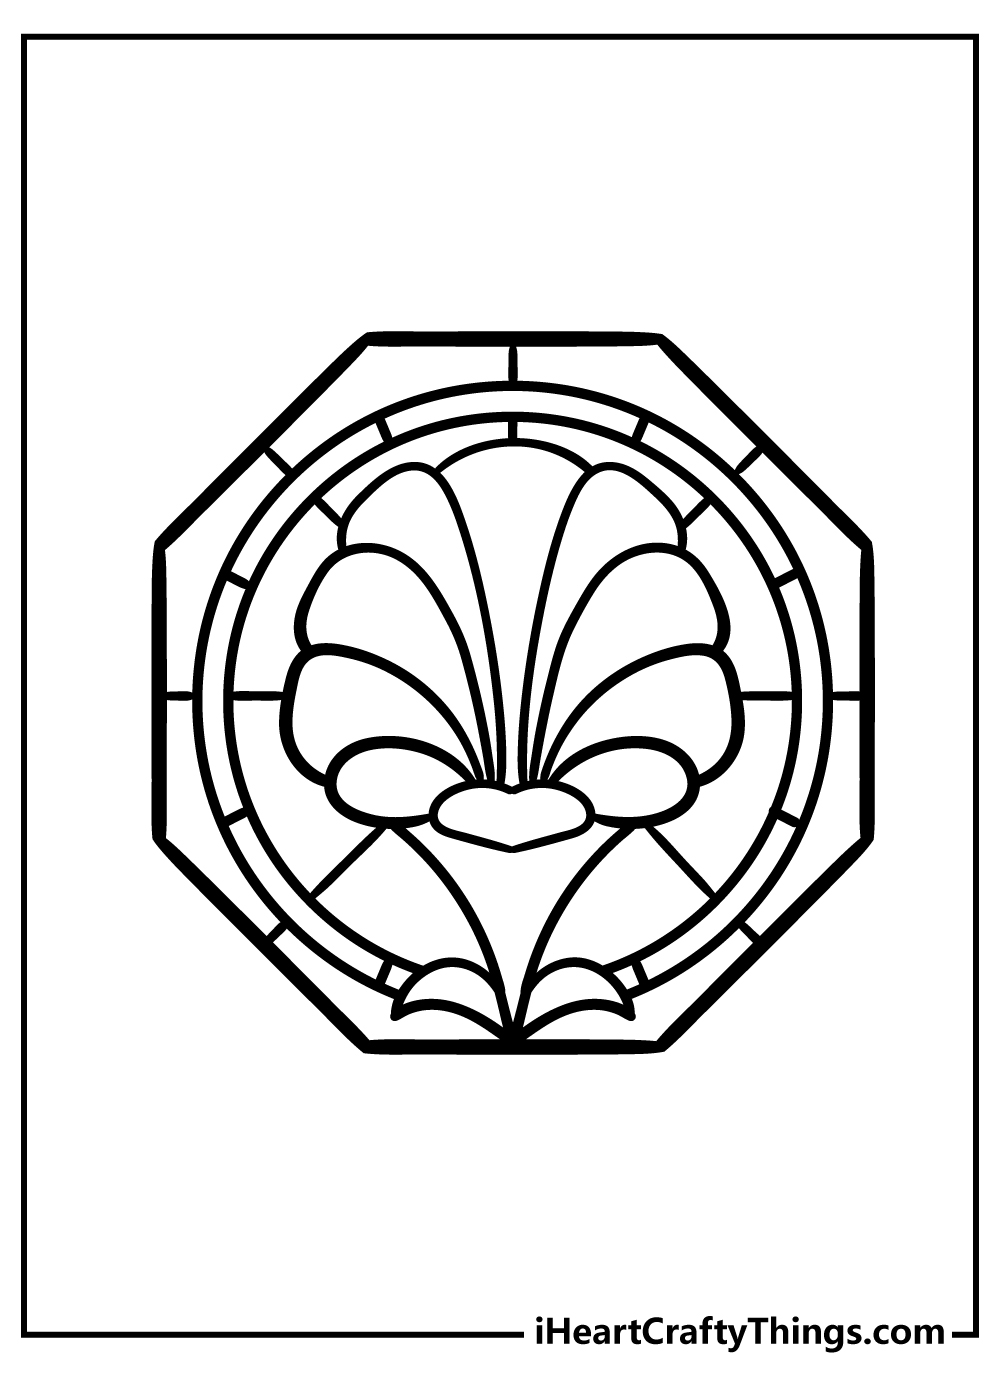 Stained Glass Coloring Pages for preschoolers free printable